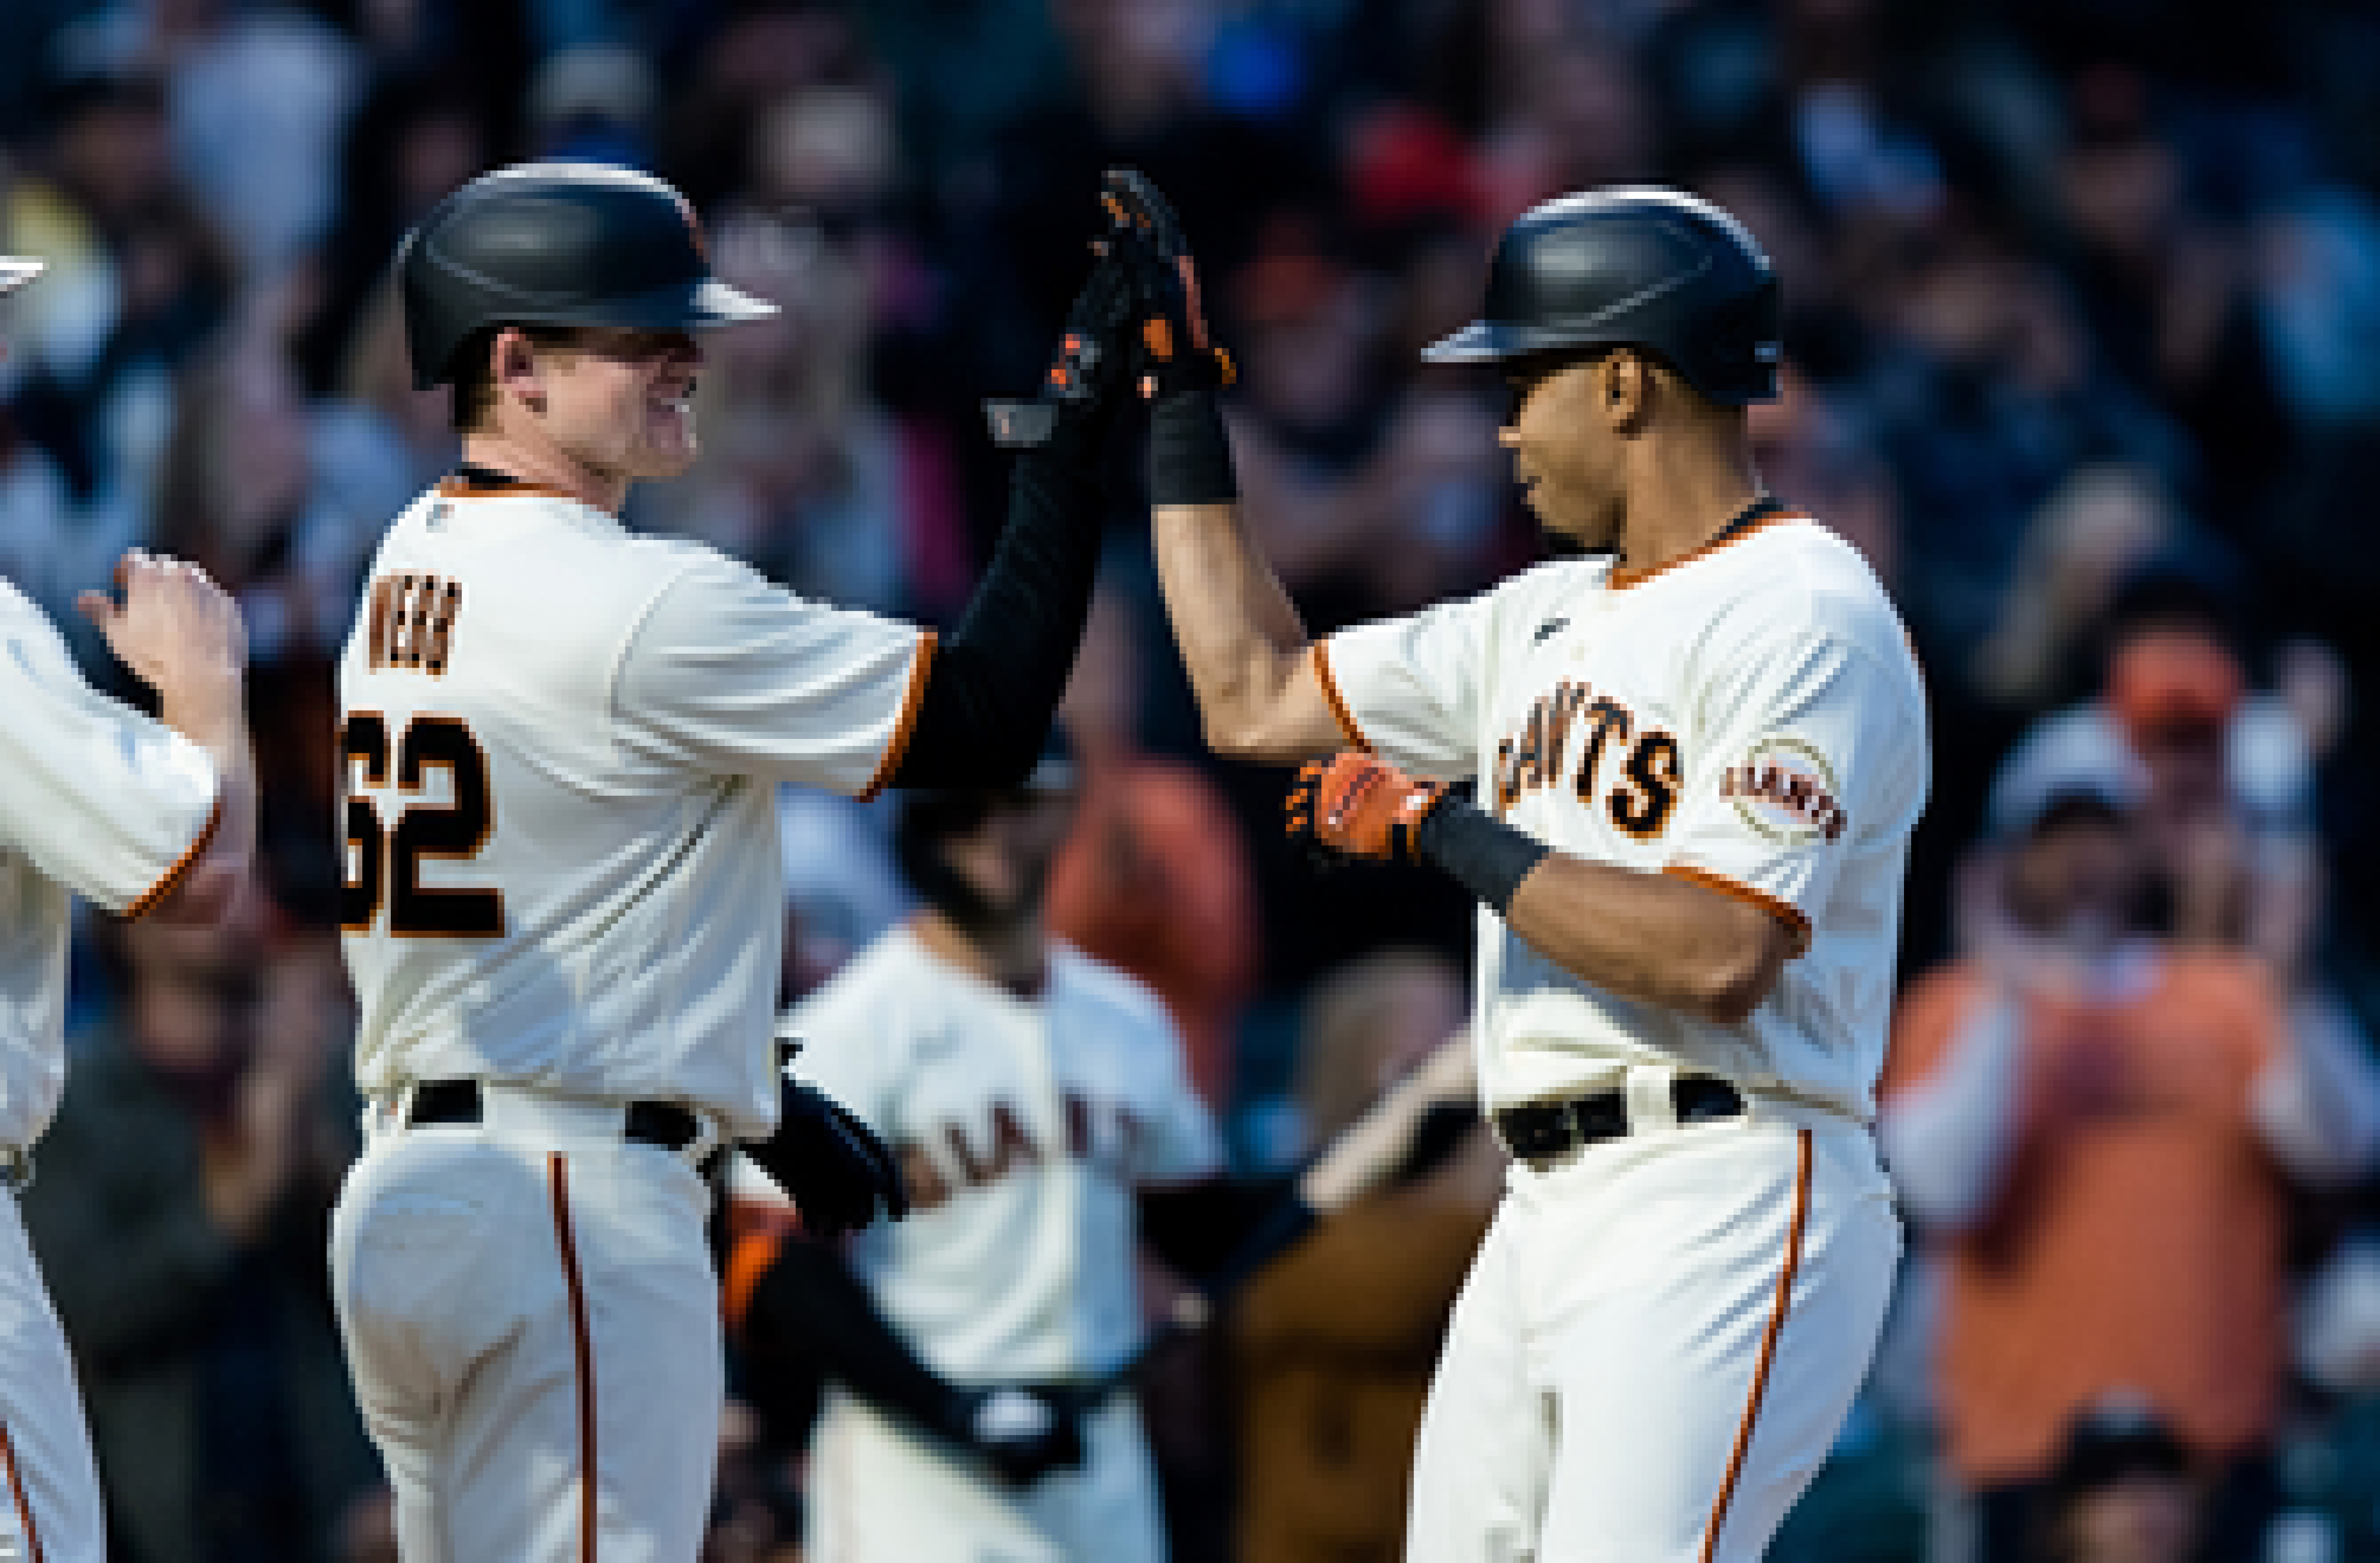 LaMonte Wade Jr. stays hot, belts another homer in Giants’ 7-0 victory over Rockies